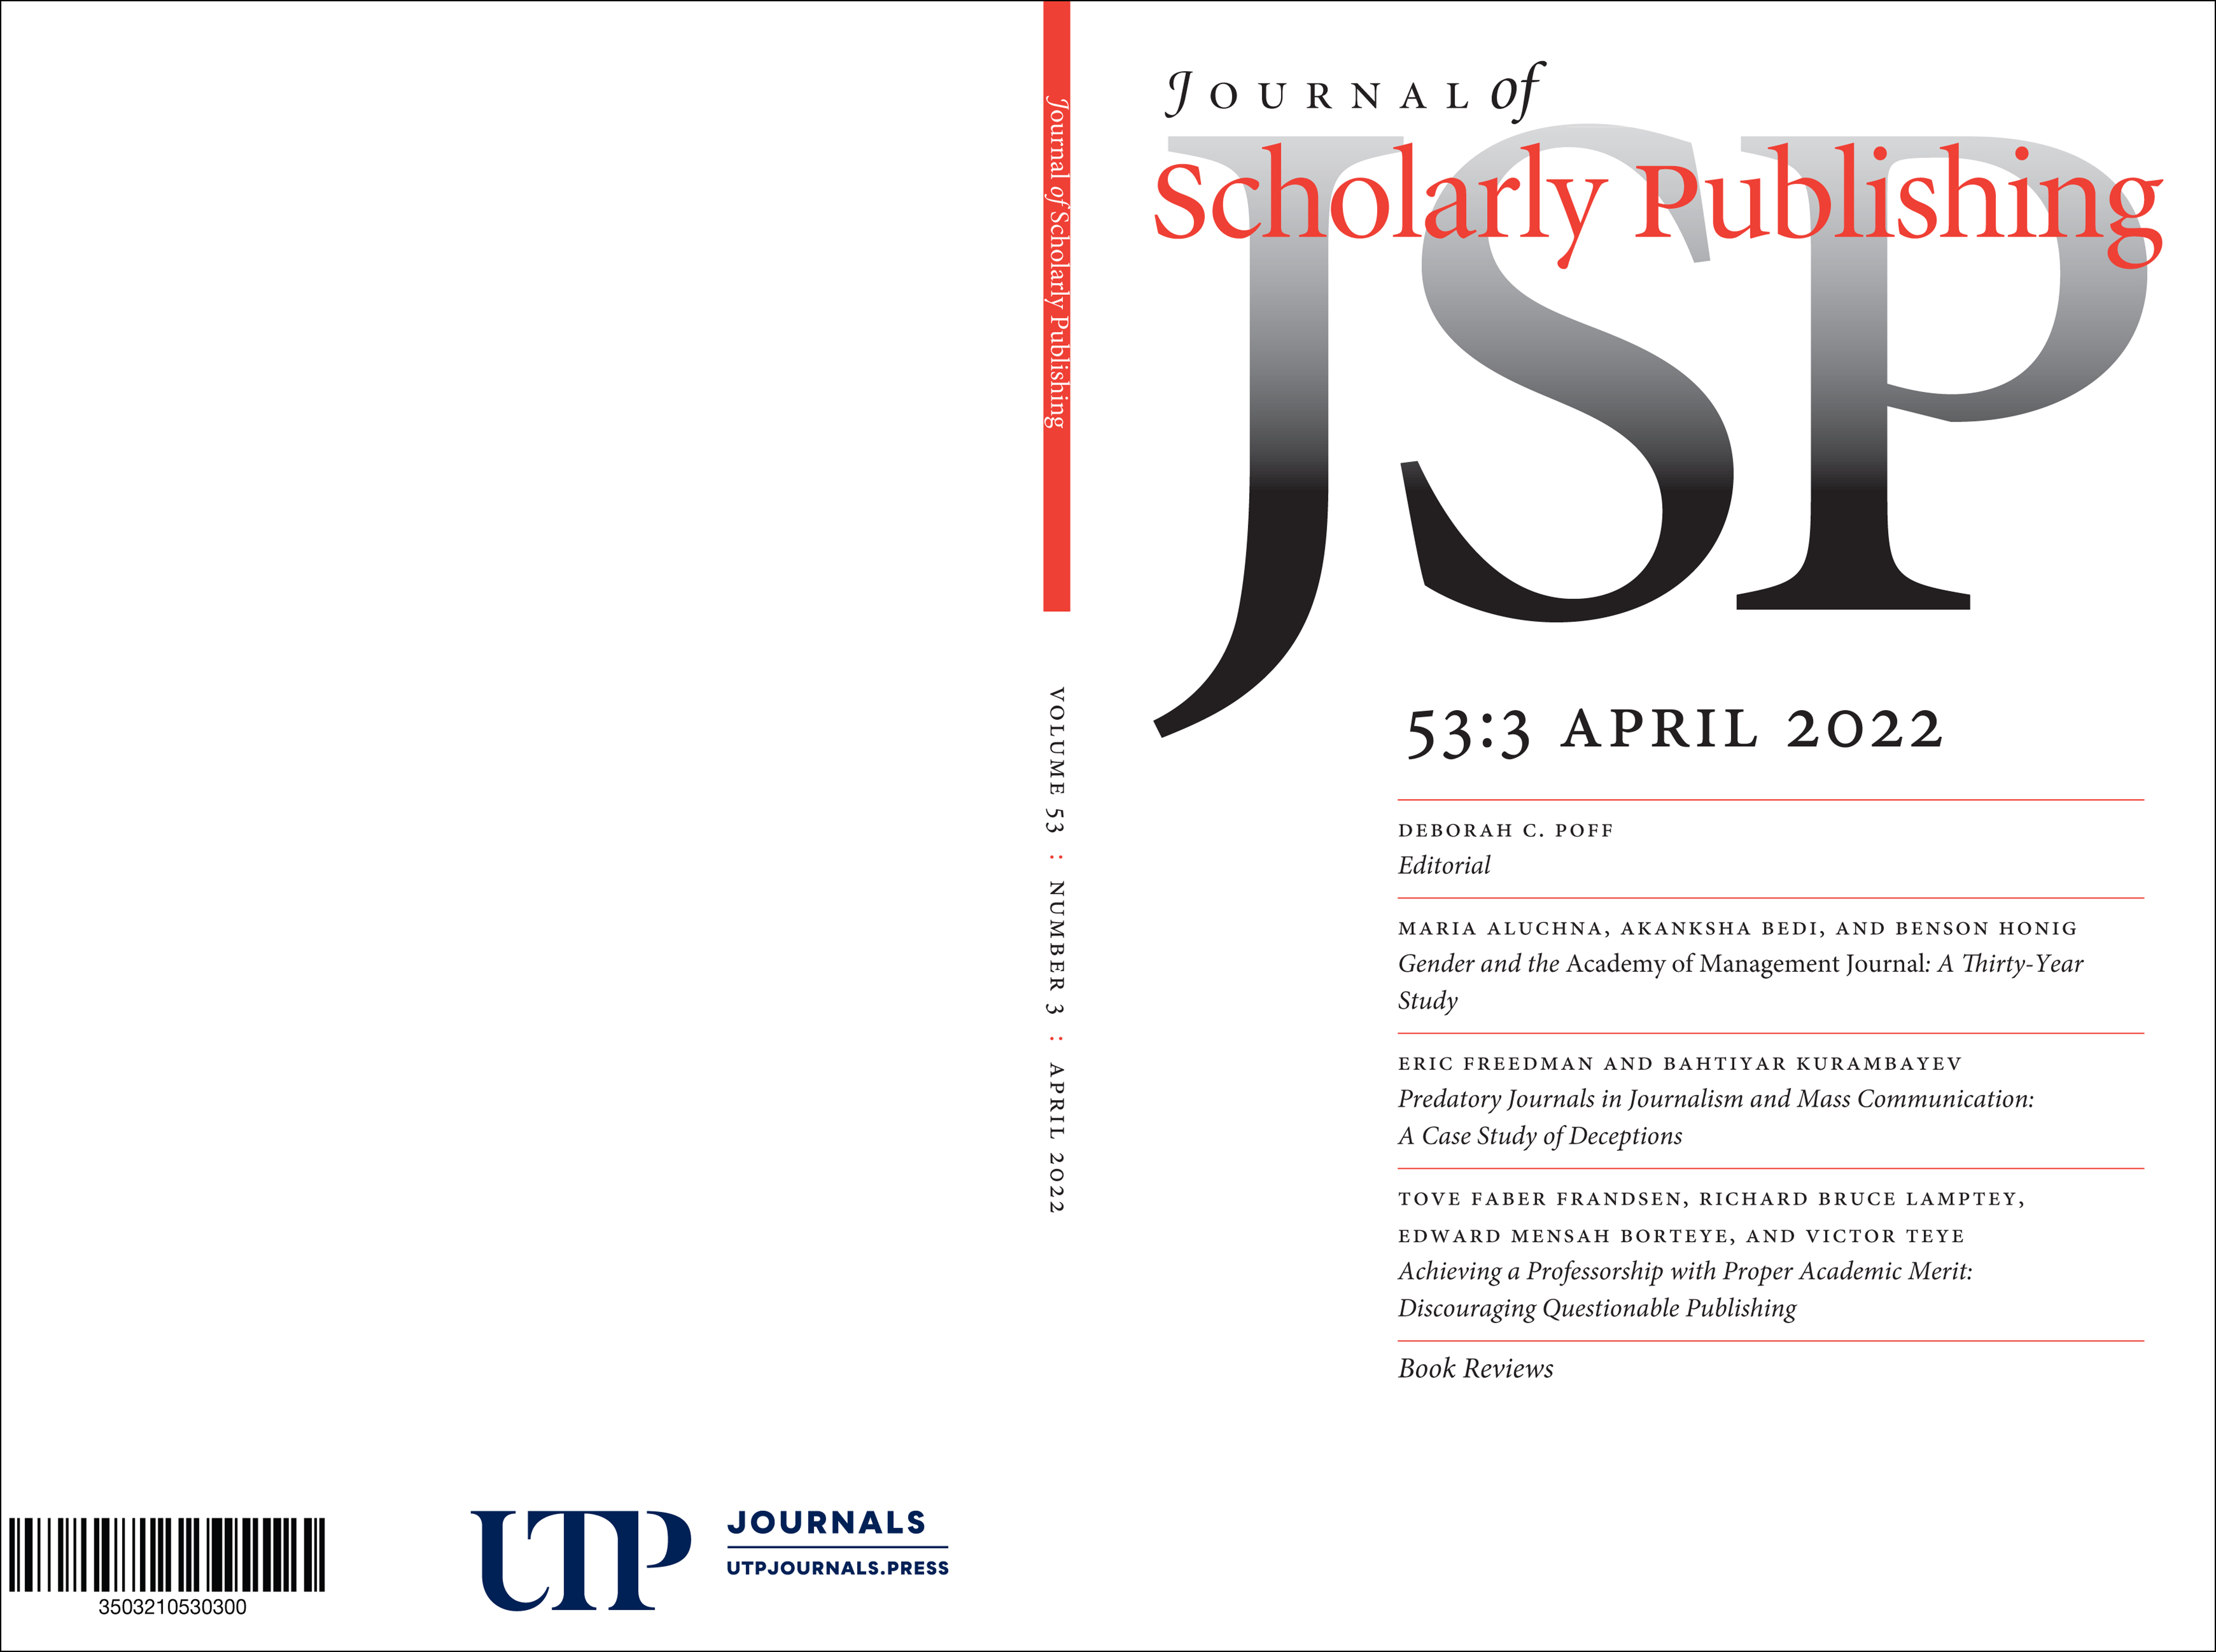 Predatory Journals in Journalism and Mass Communication: A Case Study of Deceptions